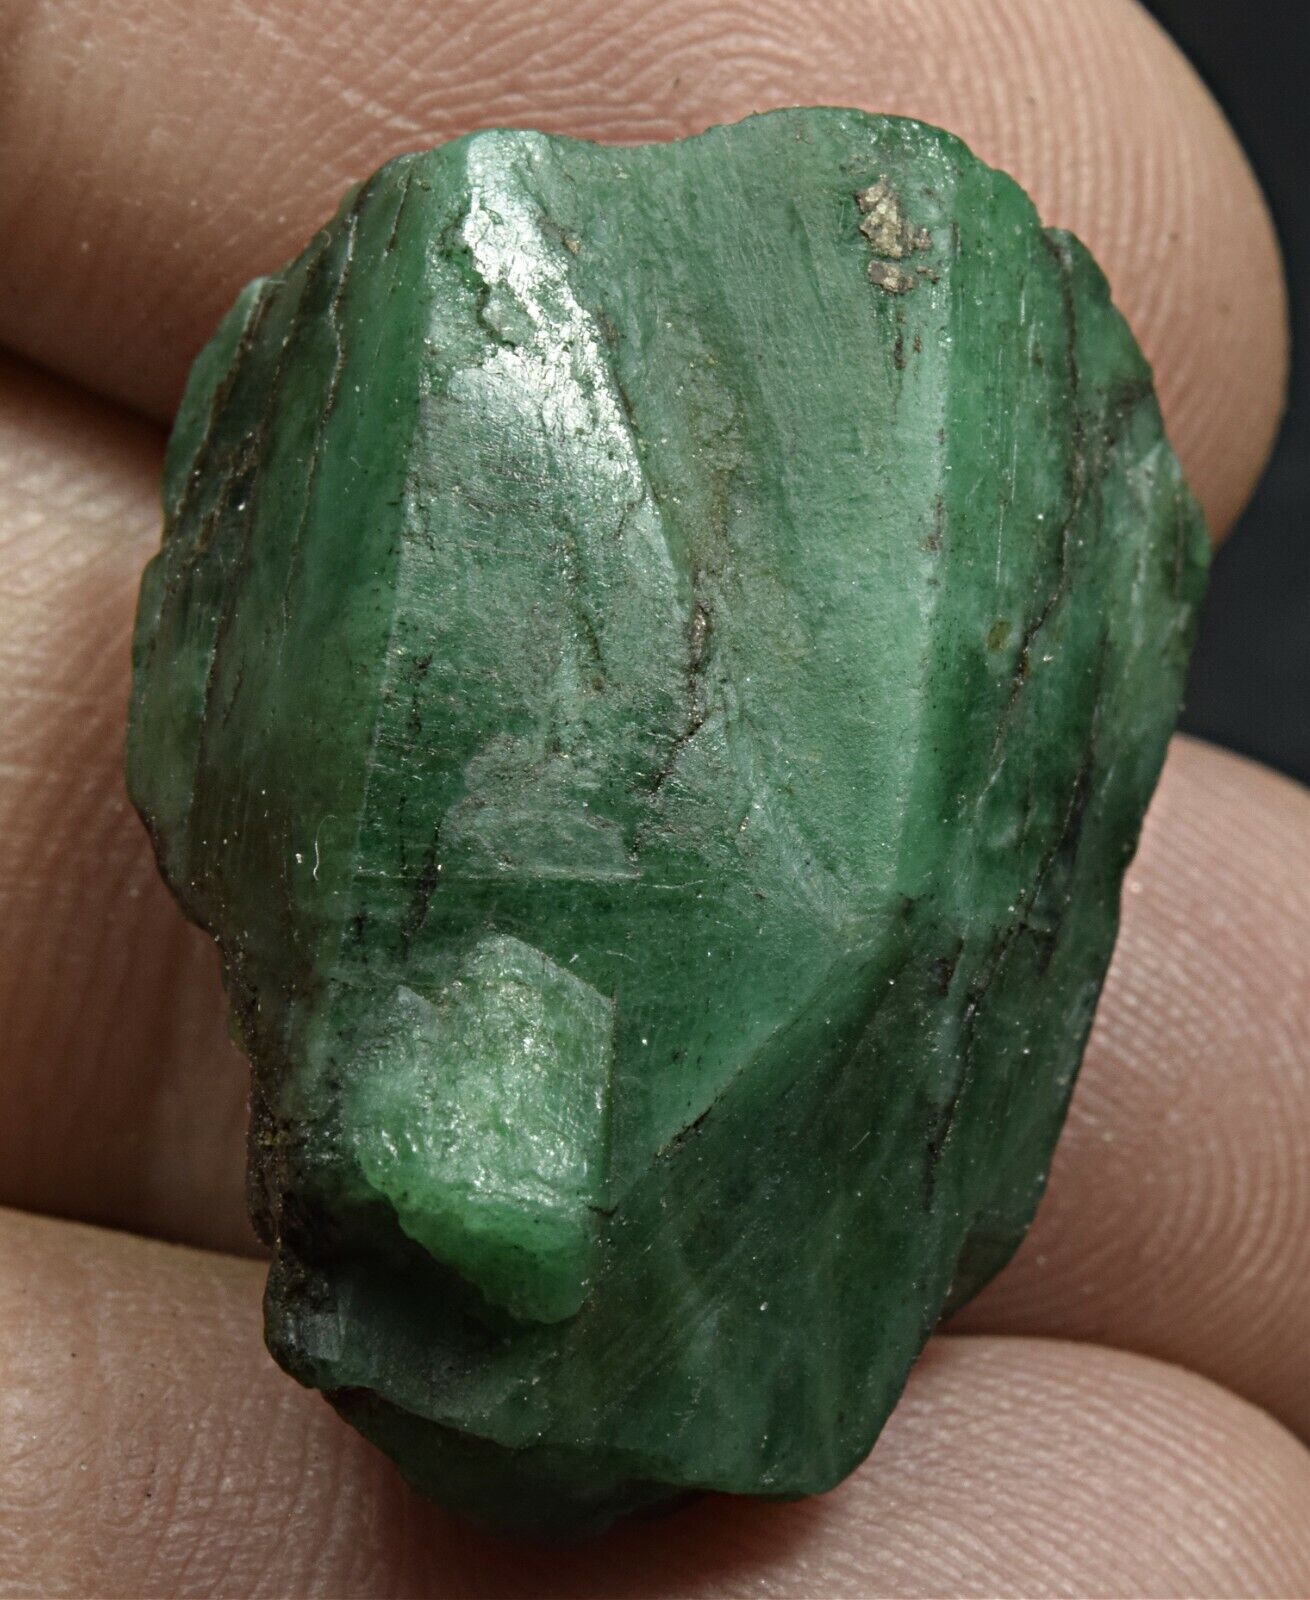 44 Carat Deep Green Emerald Crystal With Pyrite From Panjsher Afghanistan